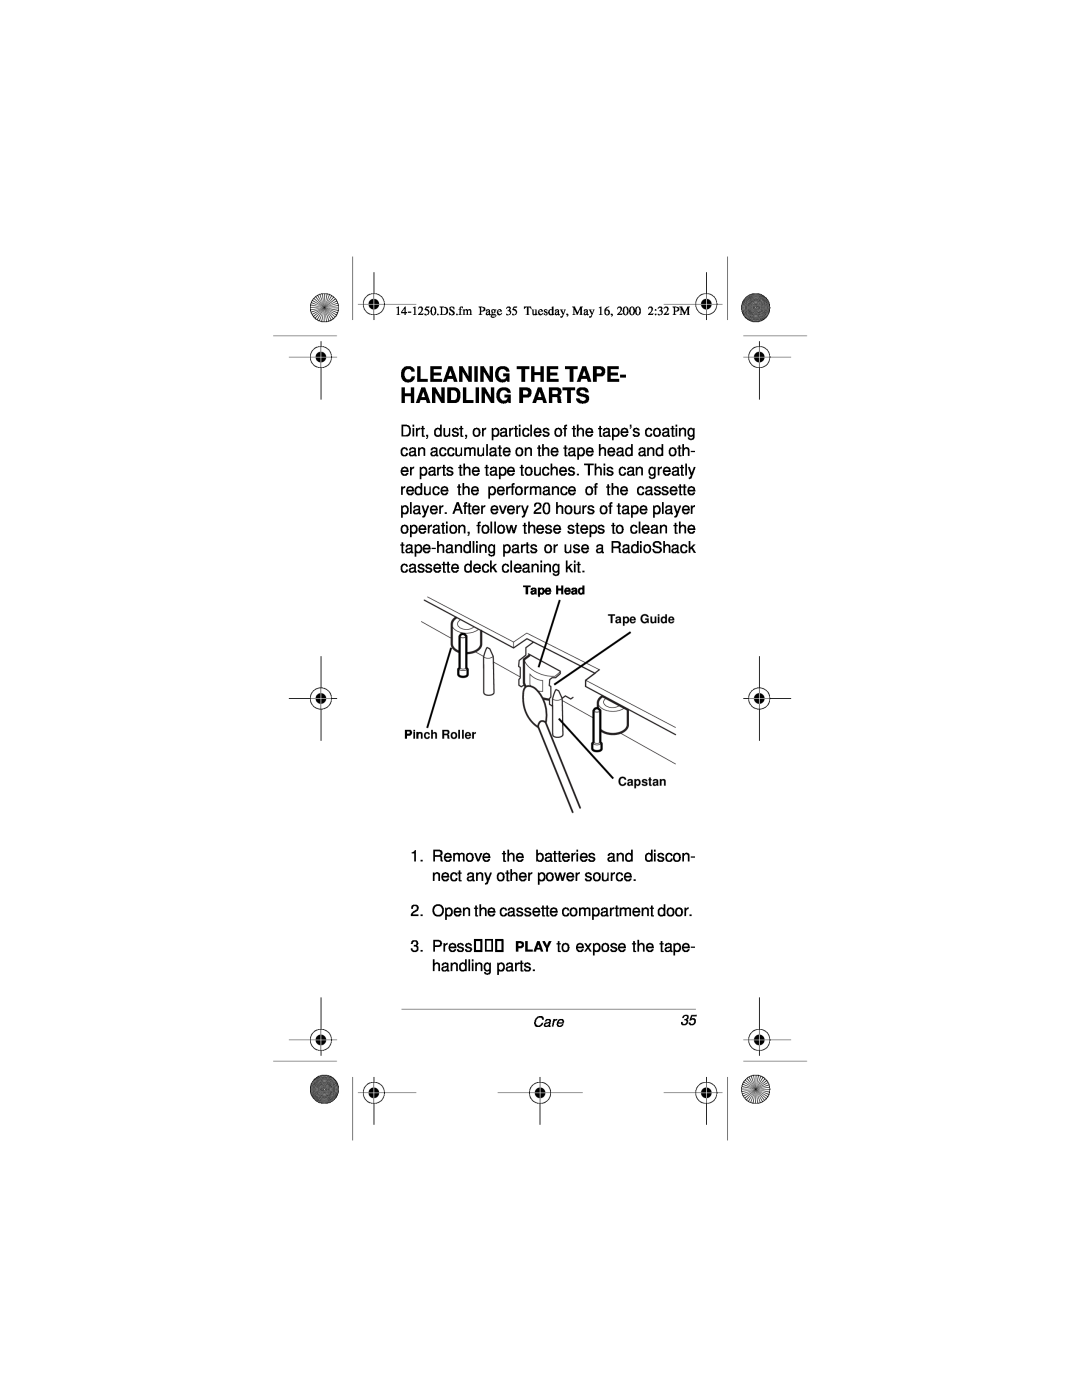 Radio Shack SCP-107 owner manual Cleaning The Tape Handling Parts 